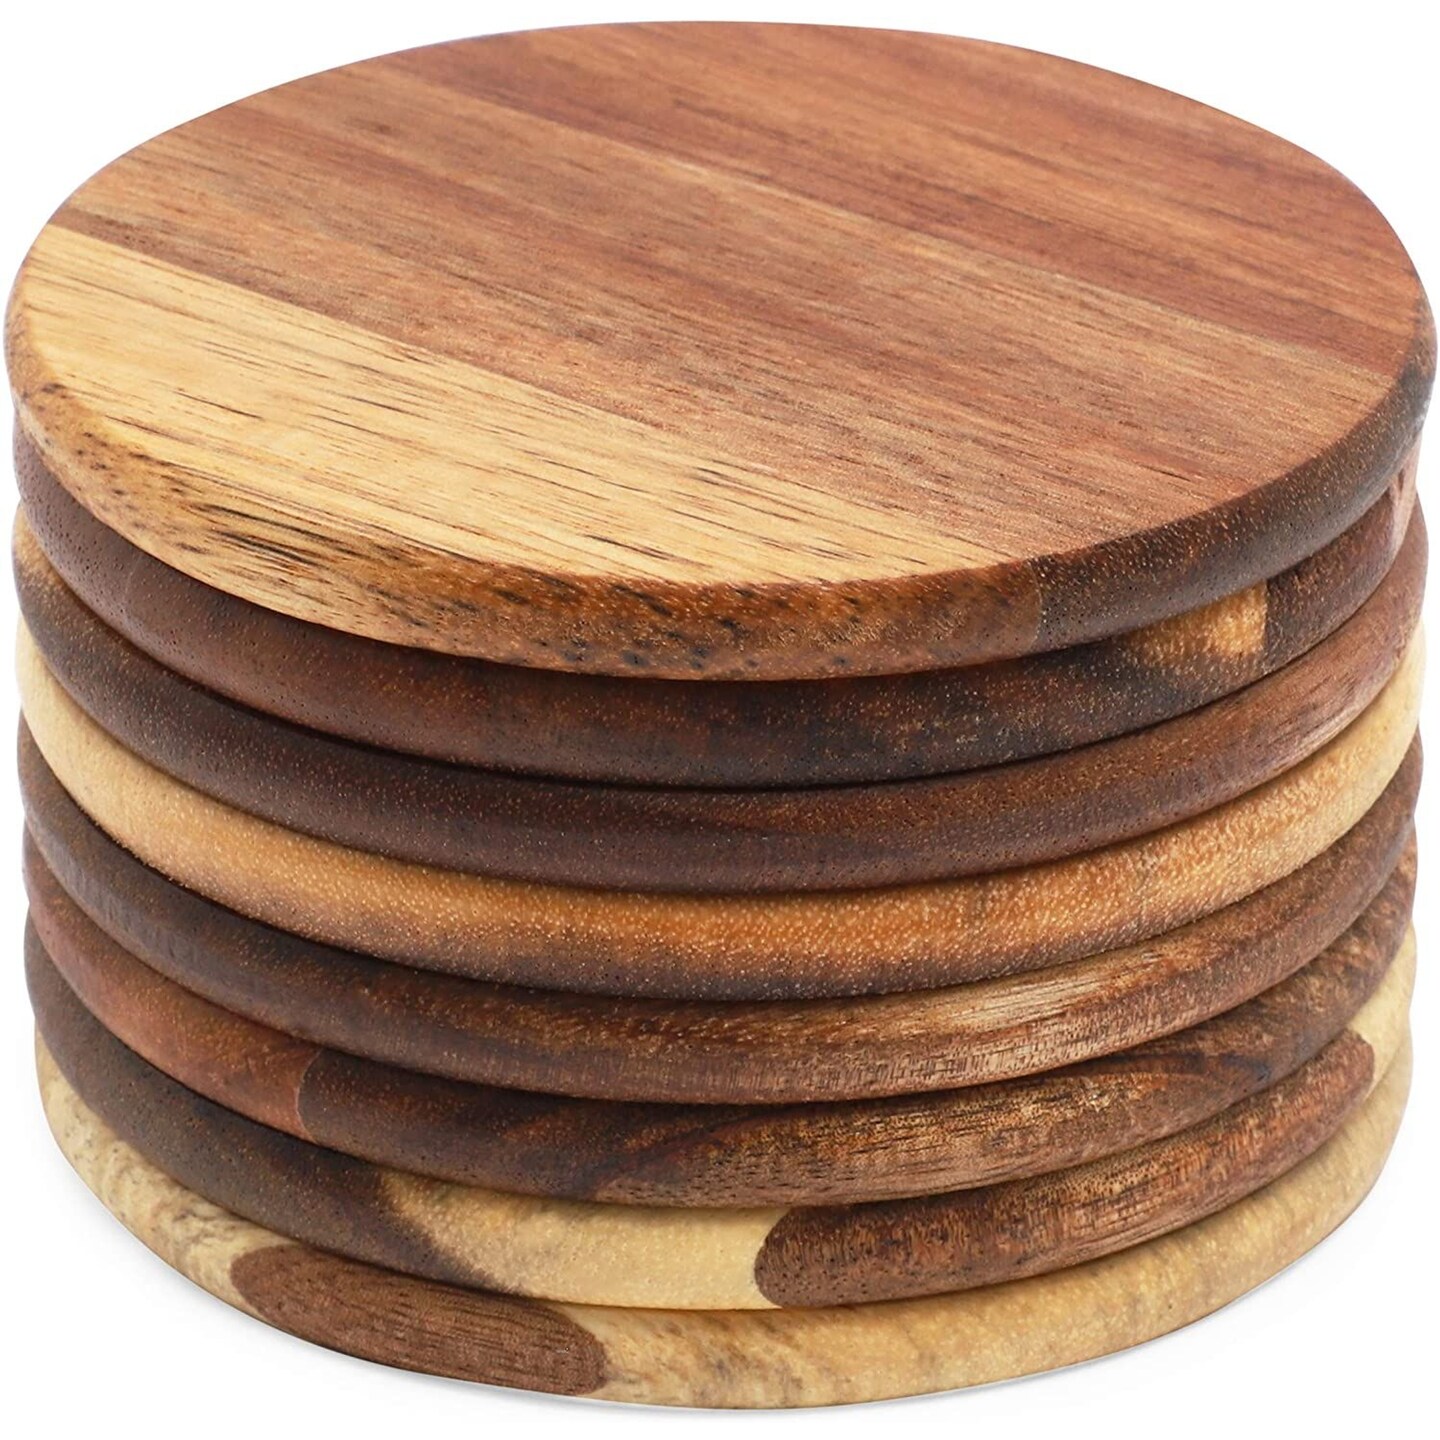 Acacia Wood Coasters For Coffee Table - Wooden Coasters For Drinks